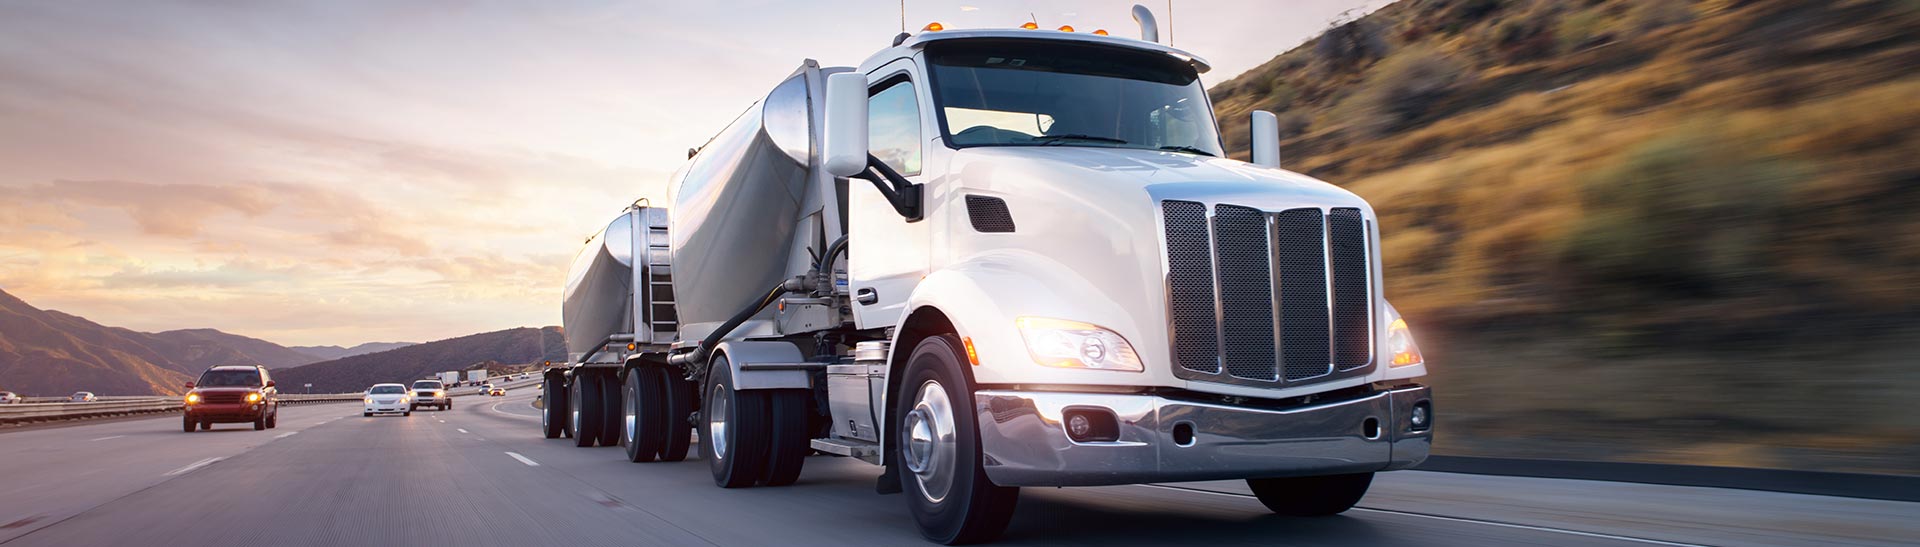 San Elizario Trucking Company, Trucking Services and Long Haul Trucking